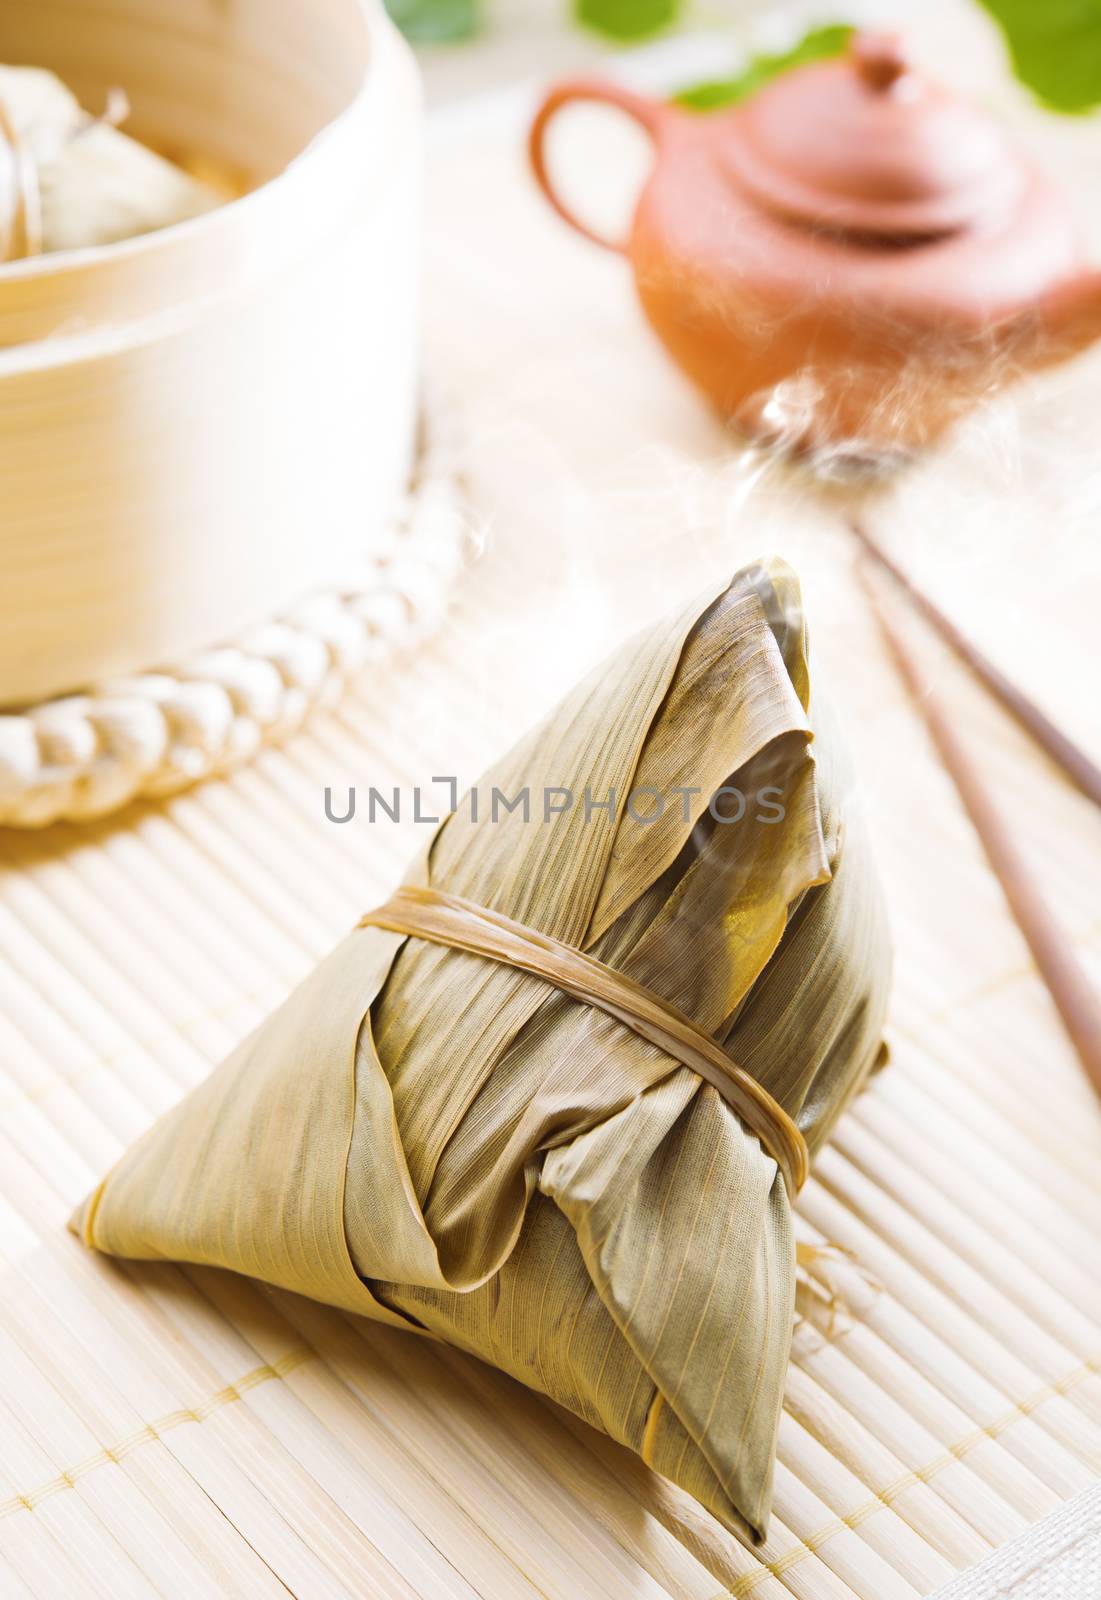 Zongzi or rice dumpling. Traditional steamed sticky glutinous rice dumplings. Chinese food dim sum. Asian cuisine.